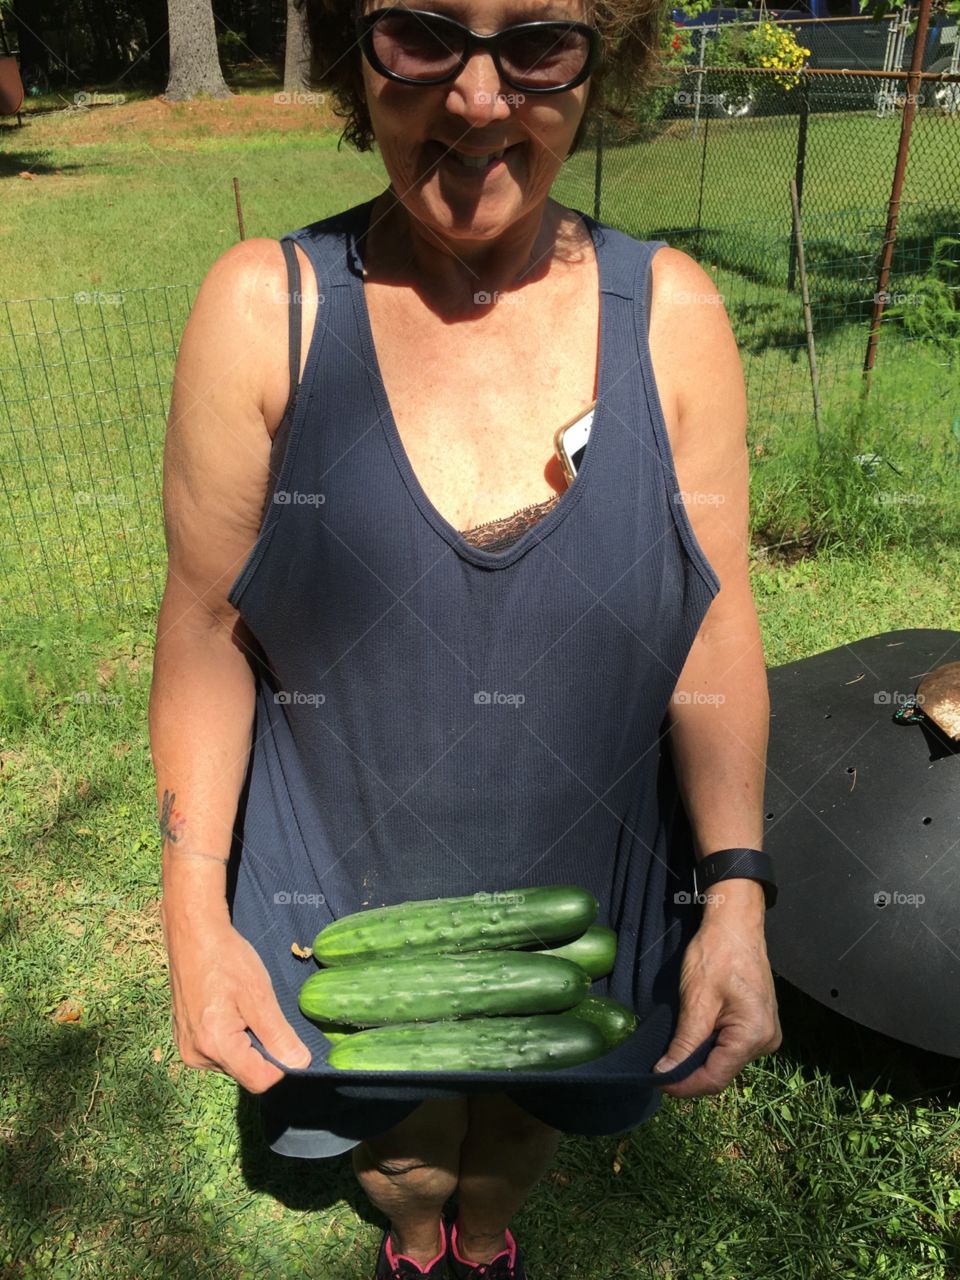 The read me, gardening. Sweaty, dirty, phone in bra, load of cukes in my shirt! LOL